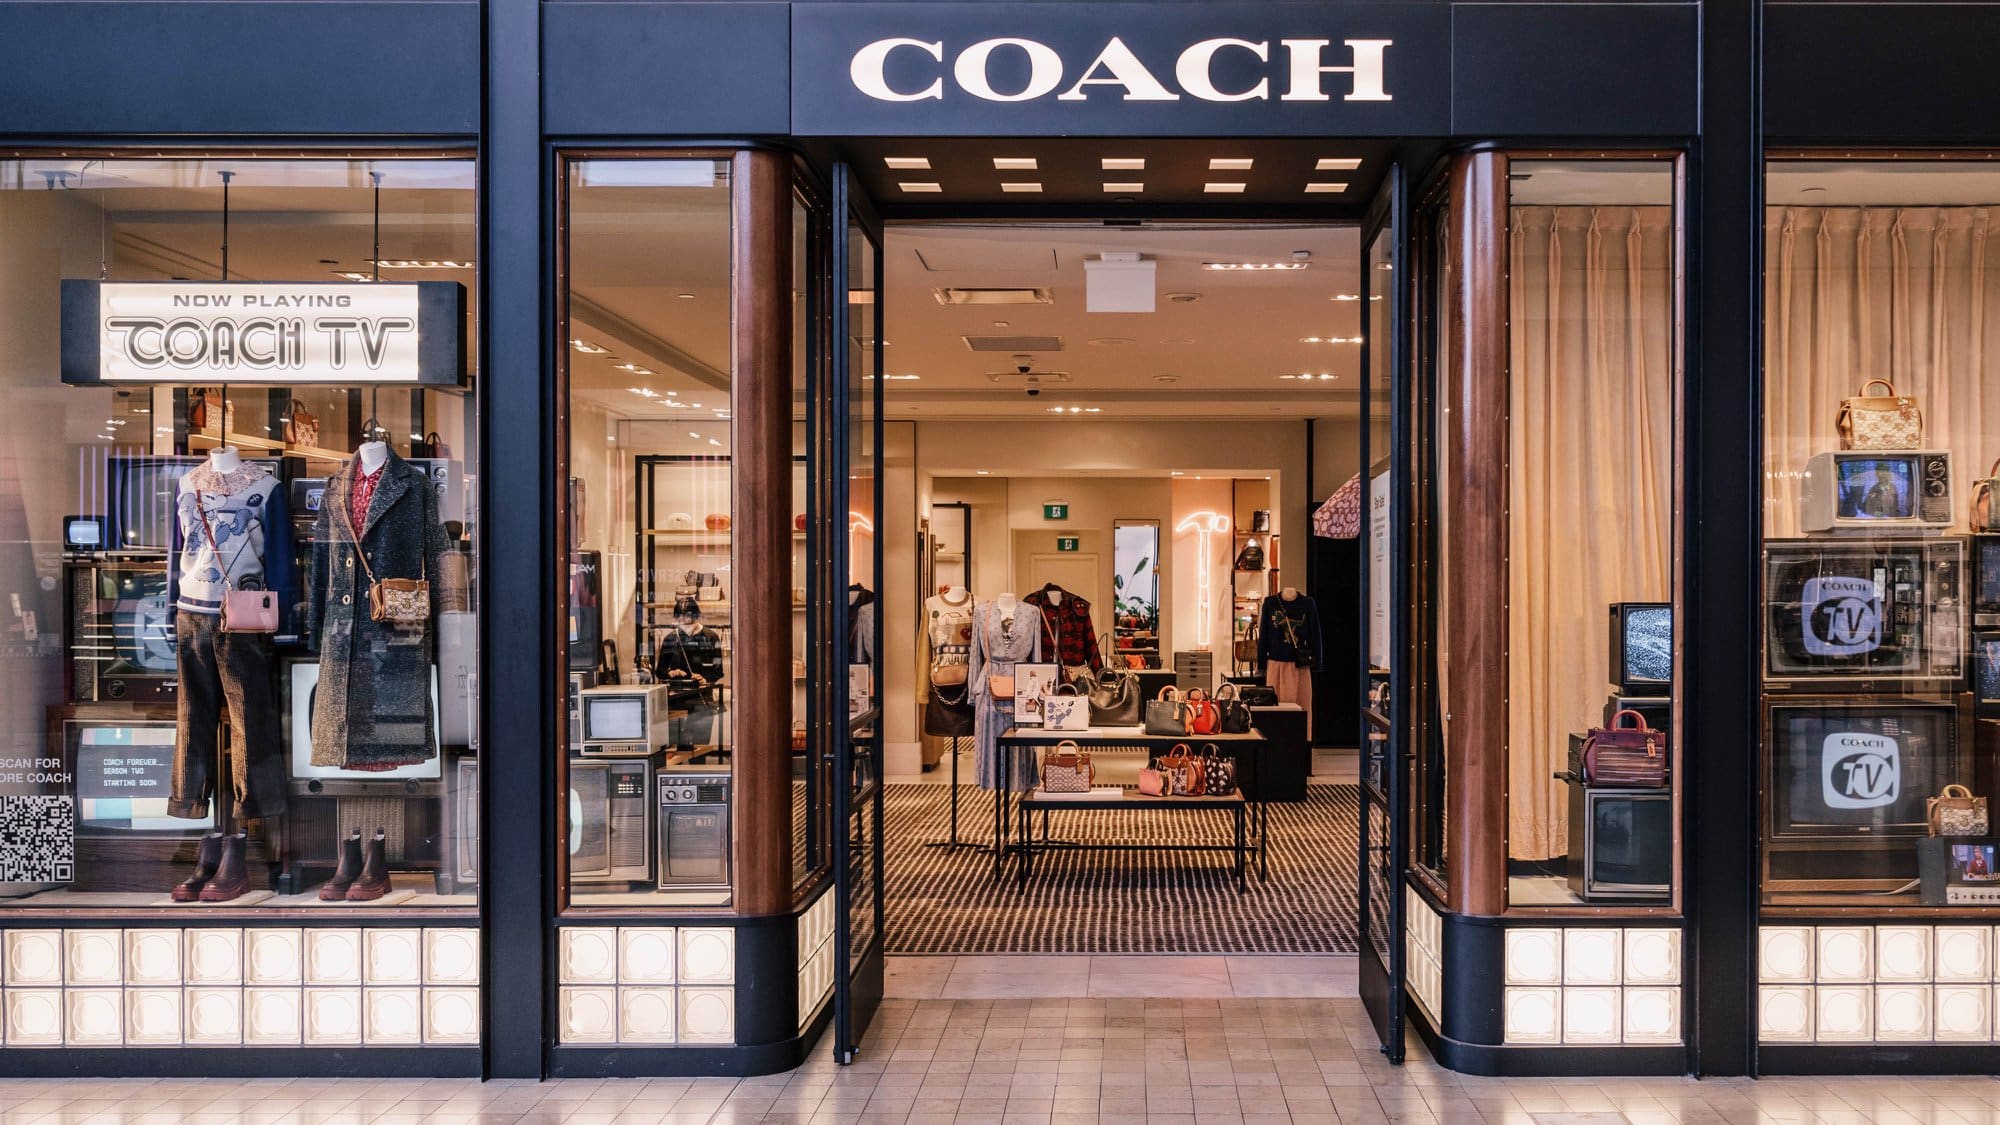 Coach's ownership group, Tapestry, shows promising results - Luxus Plus